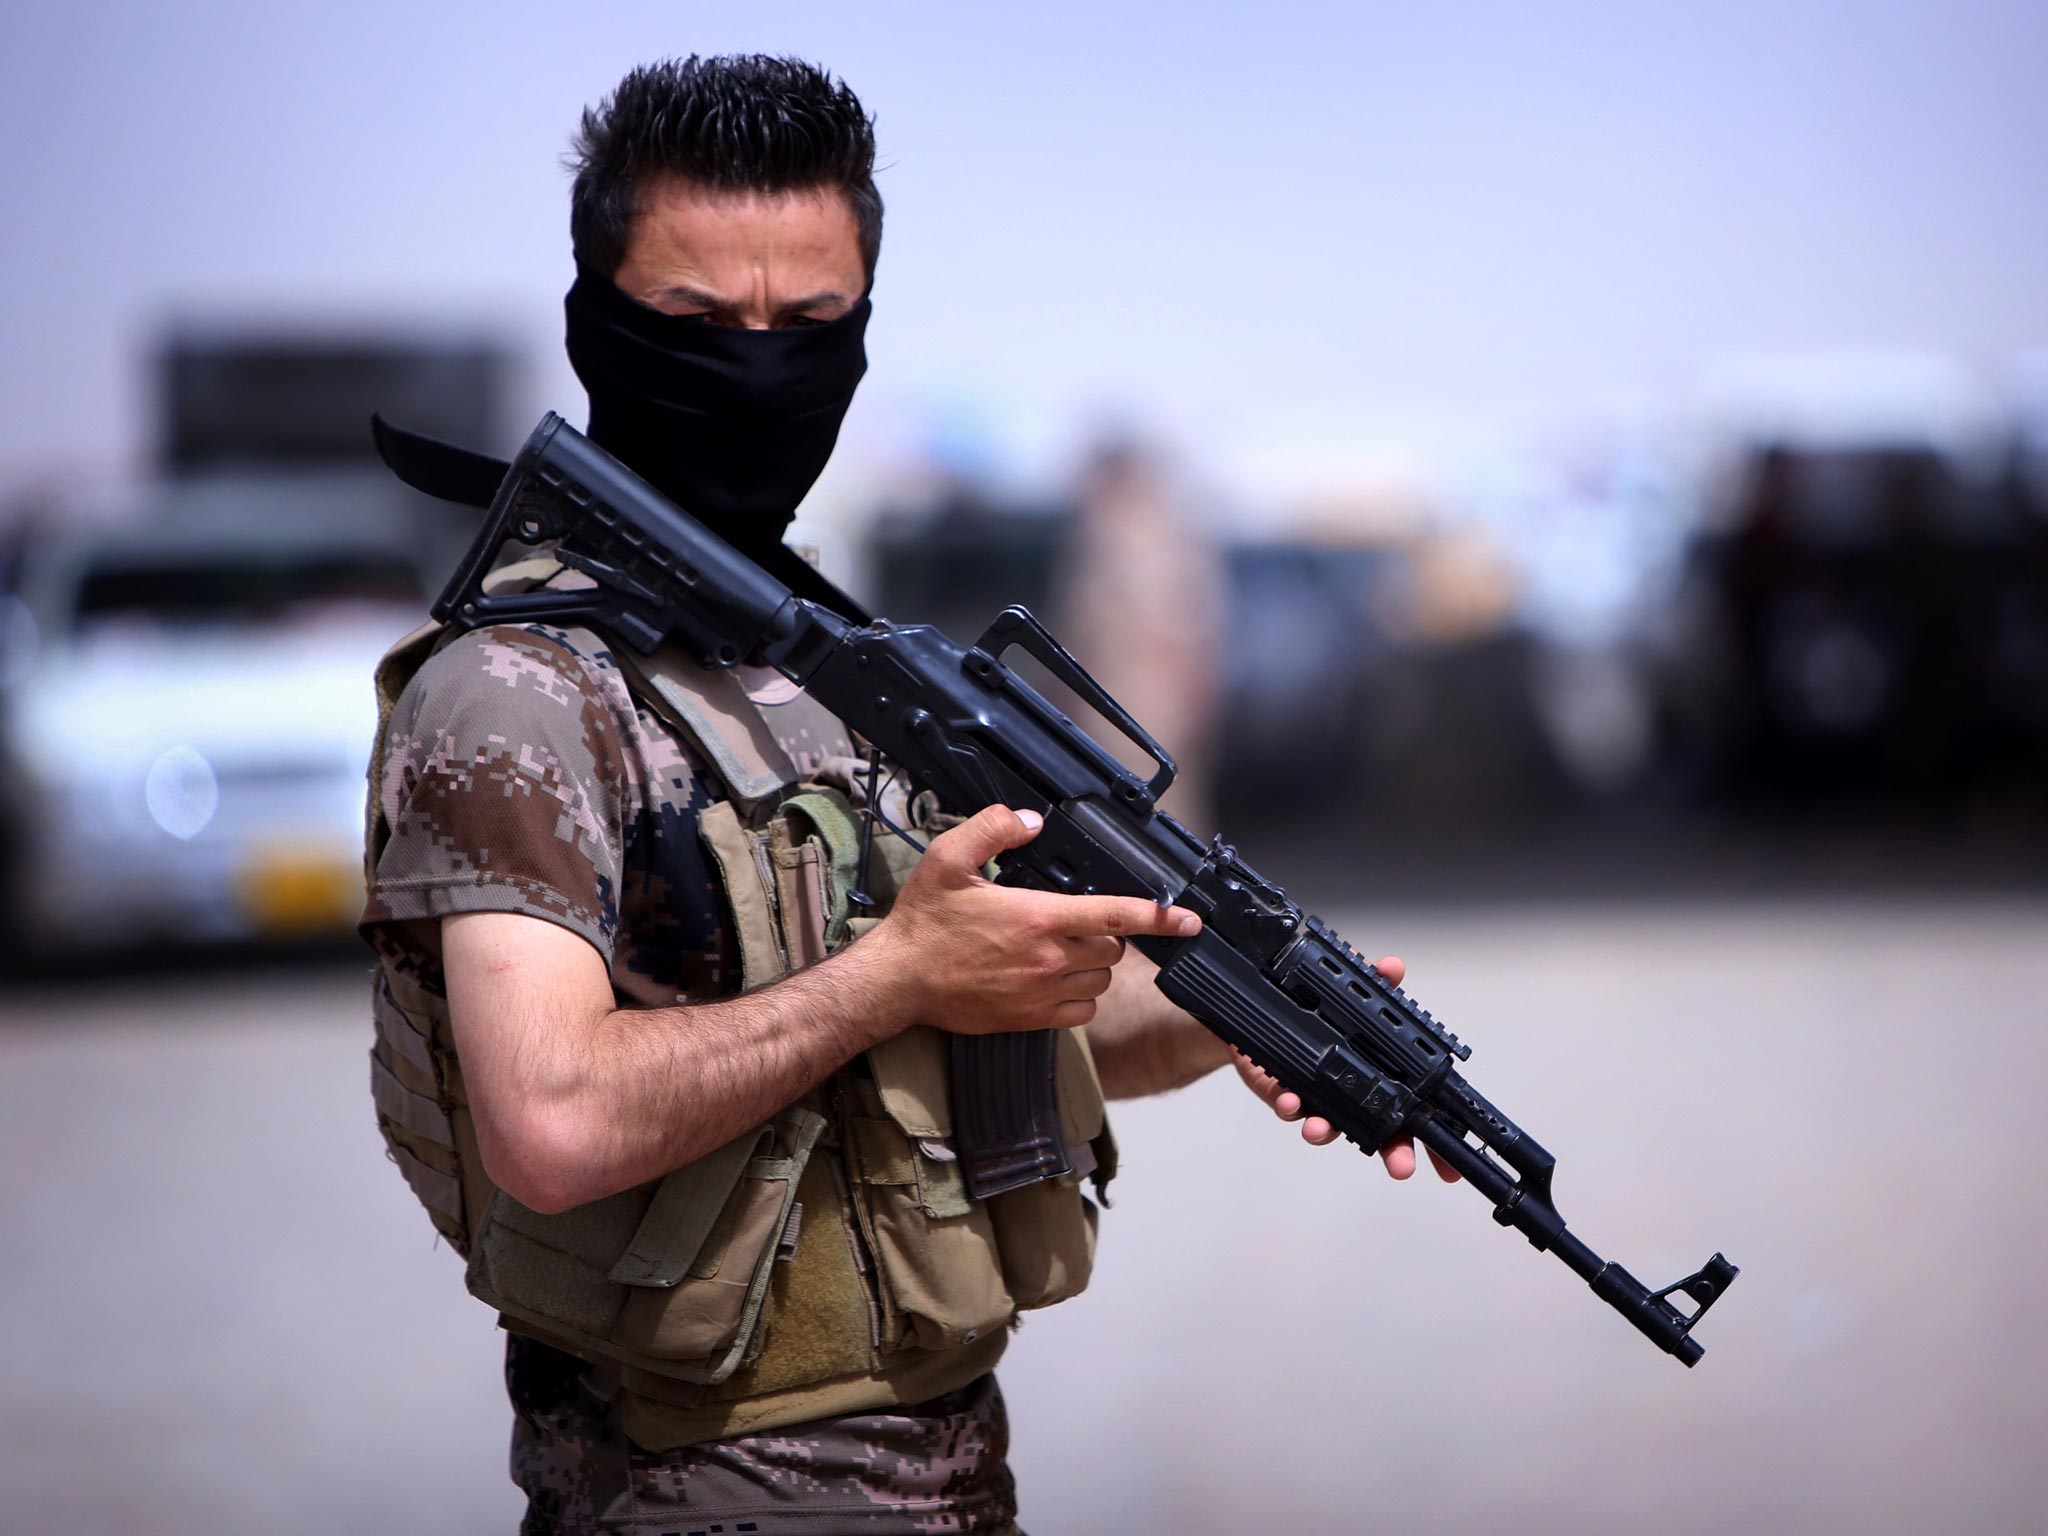 A masked Pershmerga fighter from Iraq's autonomous Kurdish region guards a temporary camp set up to shelter Iraqis fleeing violence in the northern Nineveh province, in Aski kalak